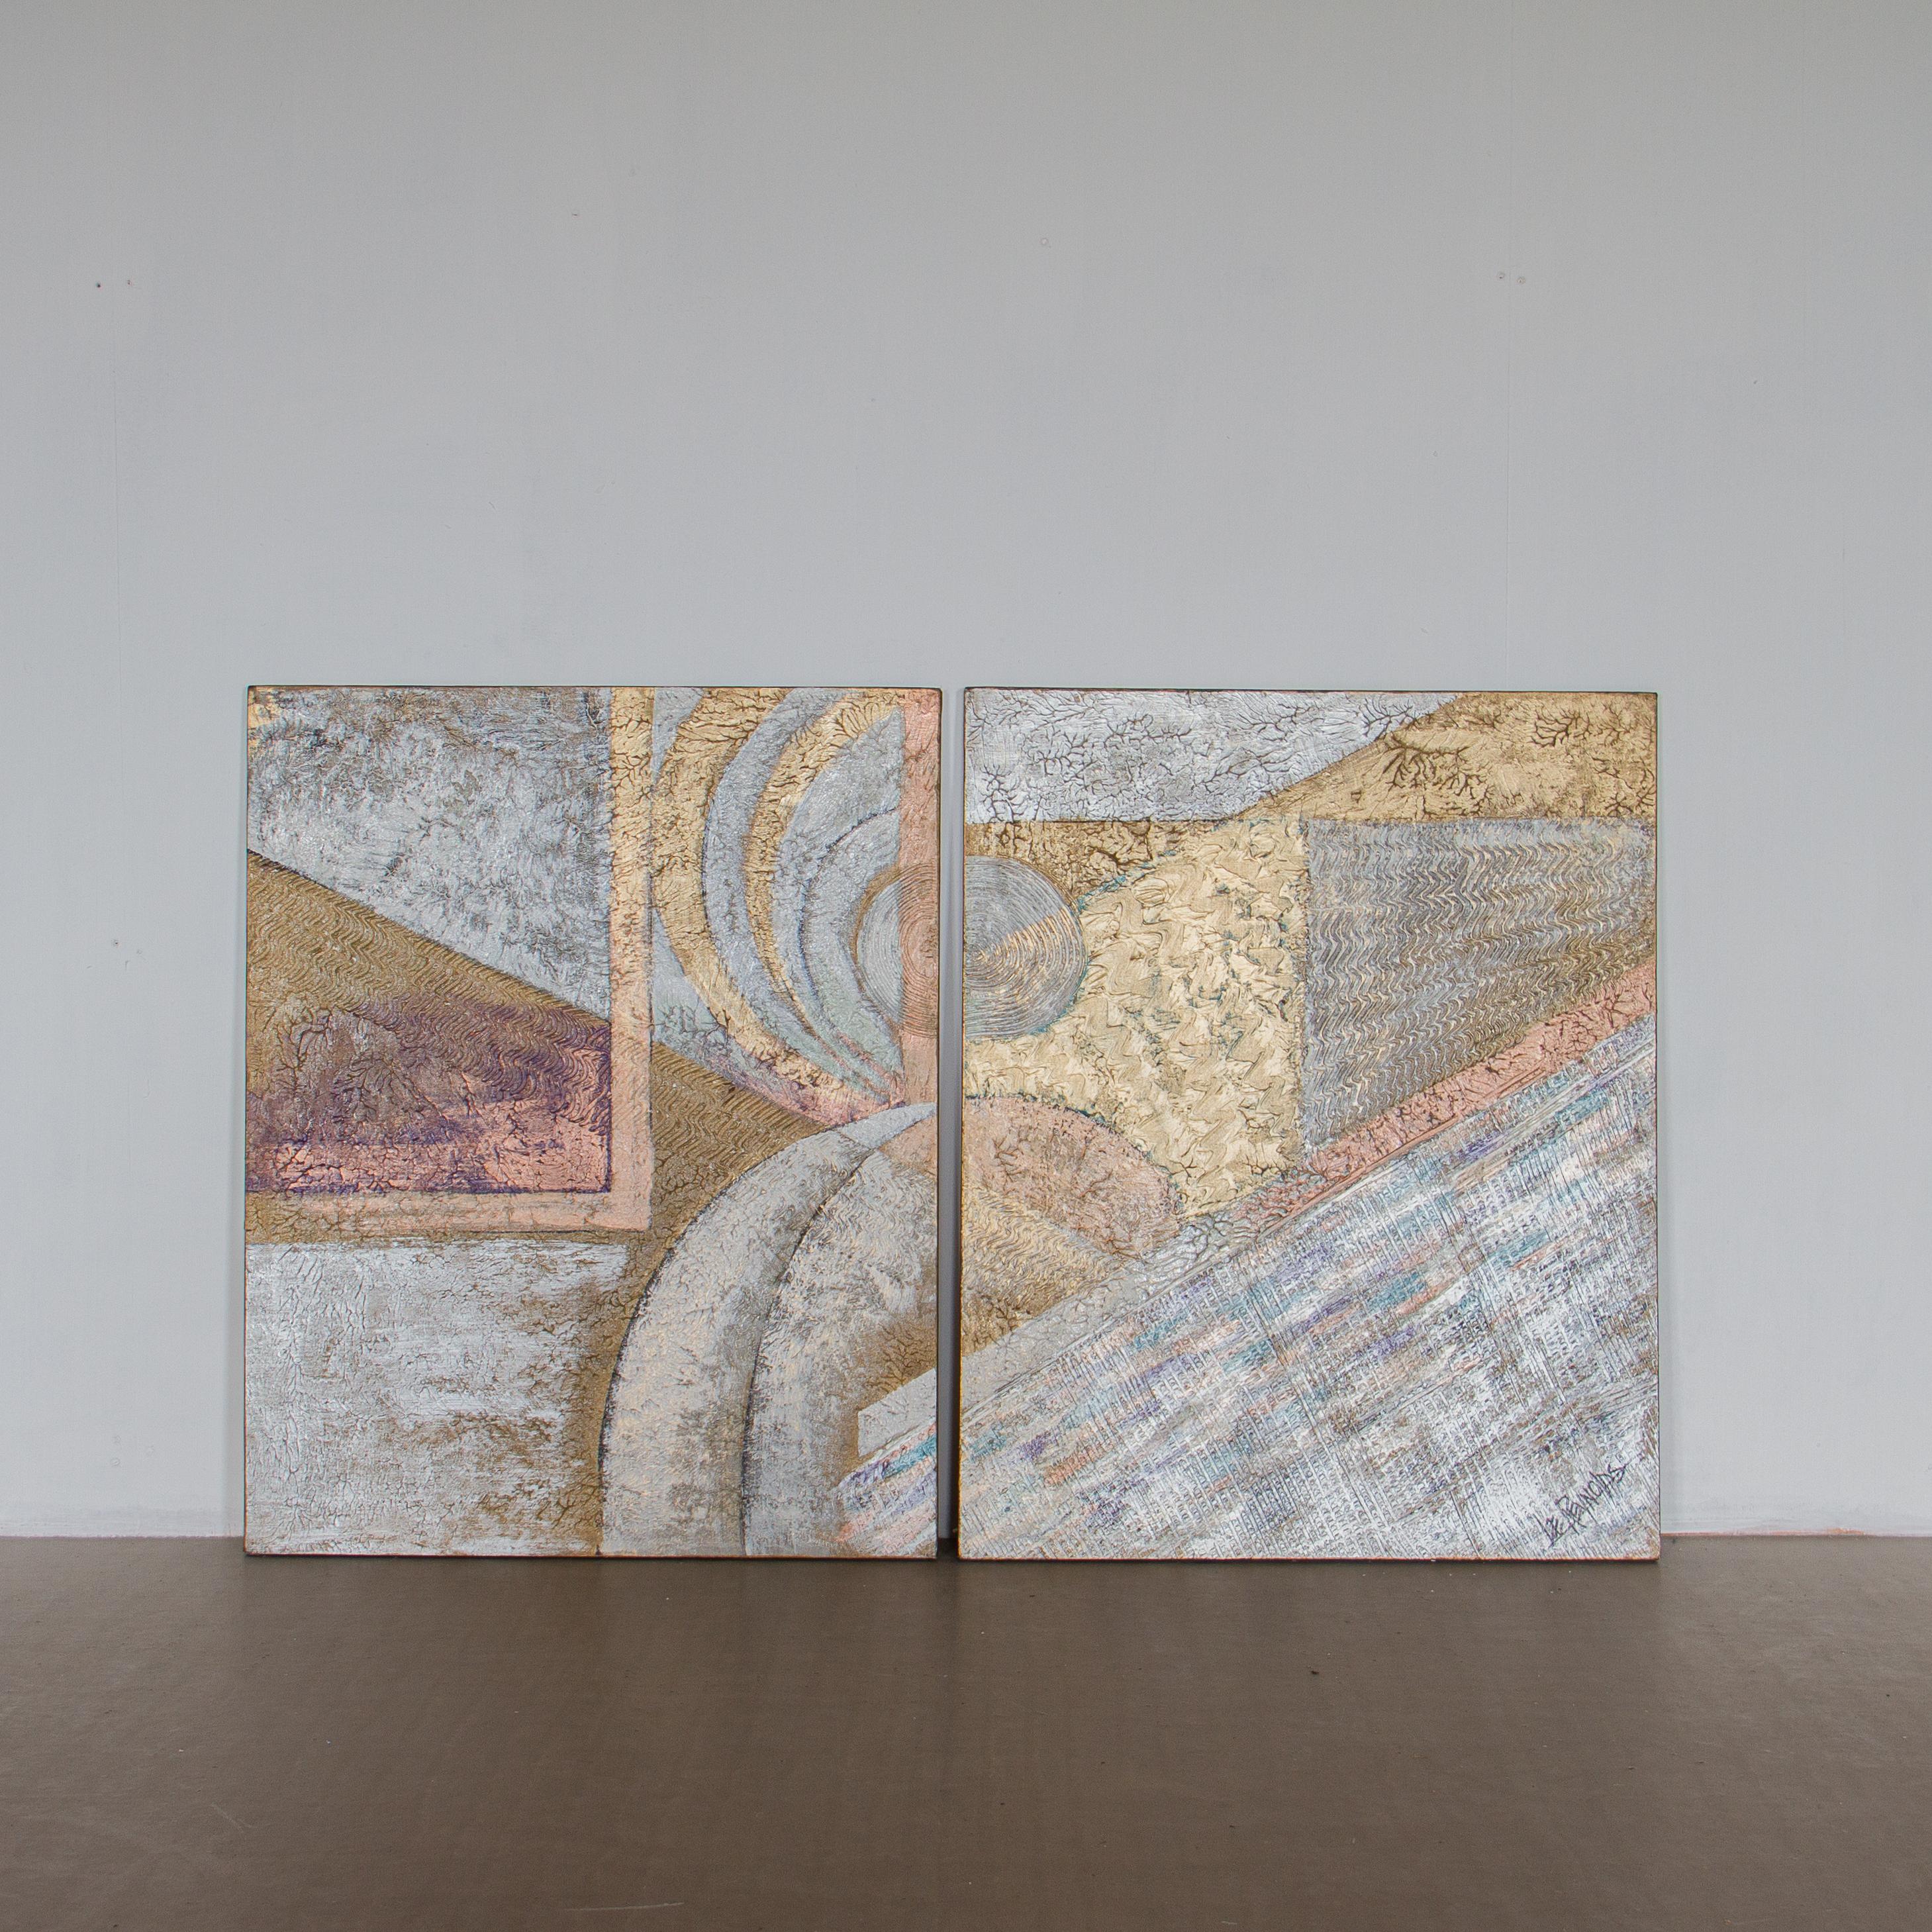 A pair of oil on canvas abstract paintings by Lee Reynolds with gilt and copper tones over pastel colours, 1970s

Lee Reynolds paintings were mostly acrylics or oil-based mediums, designed to fit into any decor with basic patterns and a range of